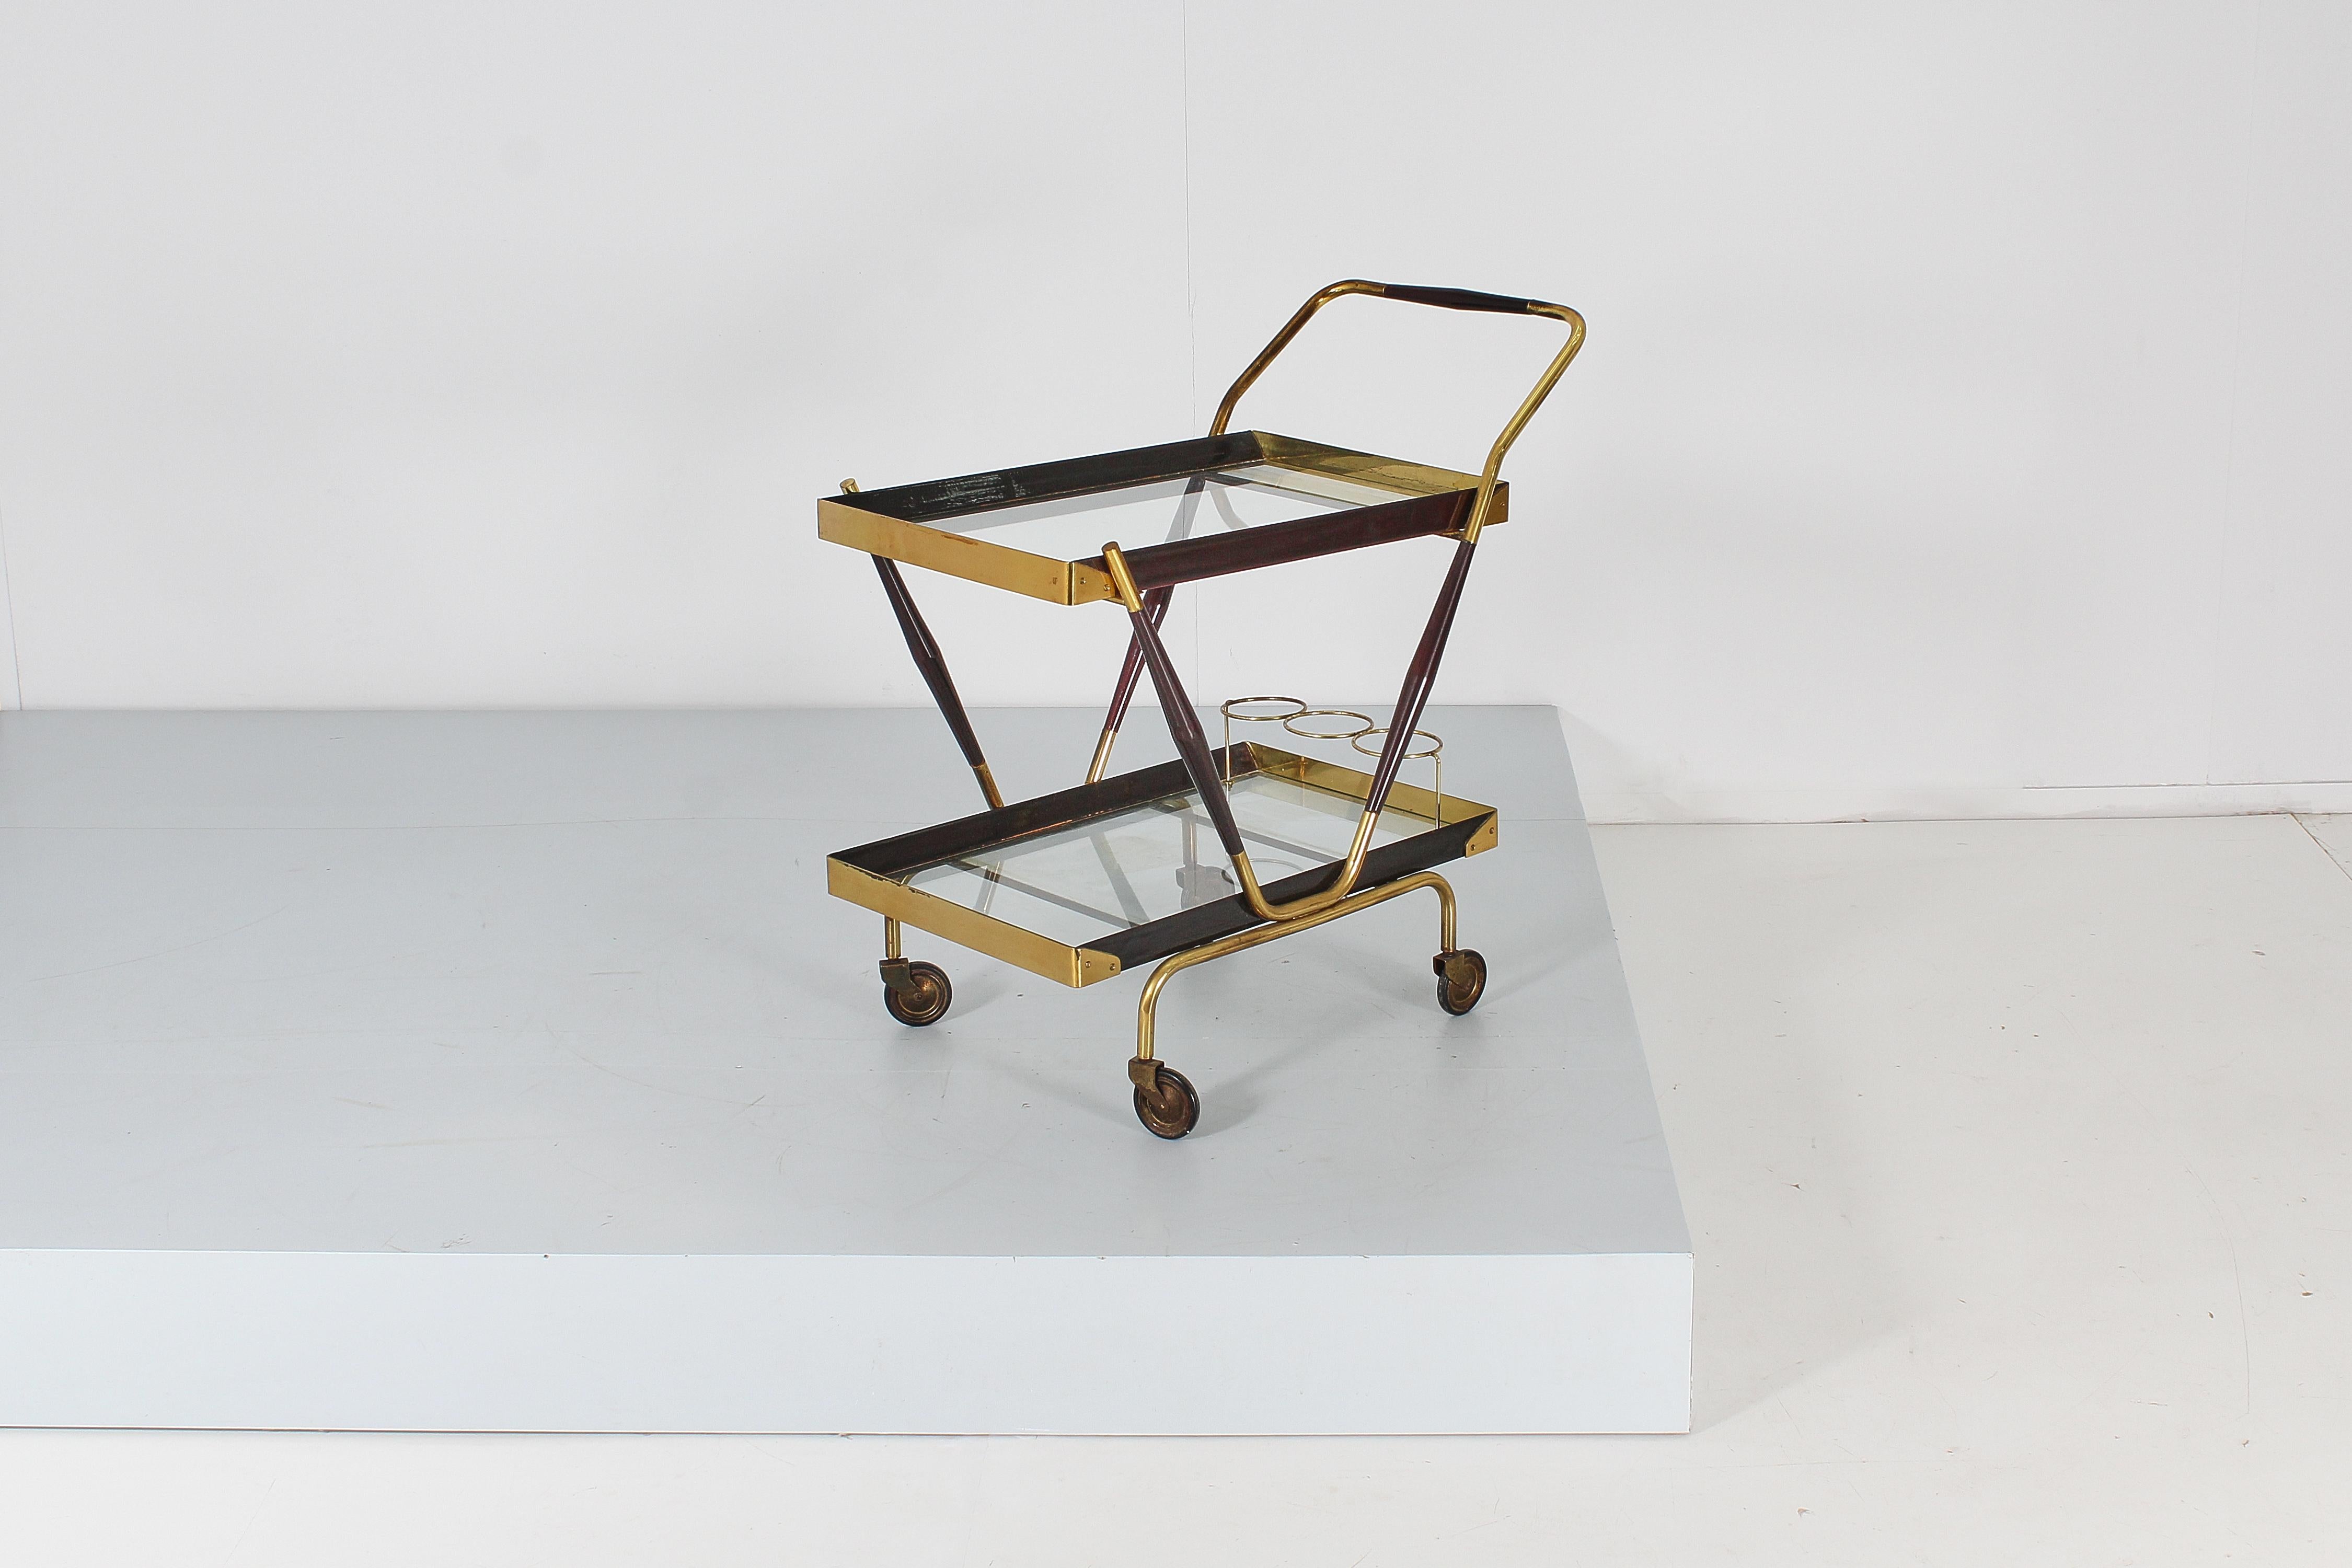 Very elegant two-level bar cart, with geometric lines in gilded brass and dark wood with three circular slots for bottles. Attributable to Cesare Lacca, Italian production in the 60s.
Wear consistent with age and use.